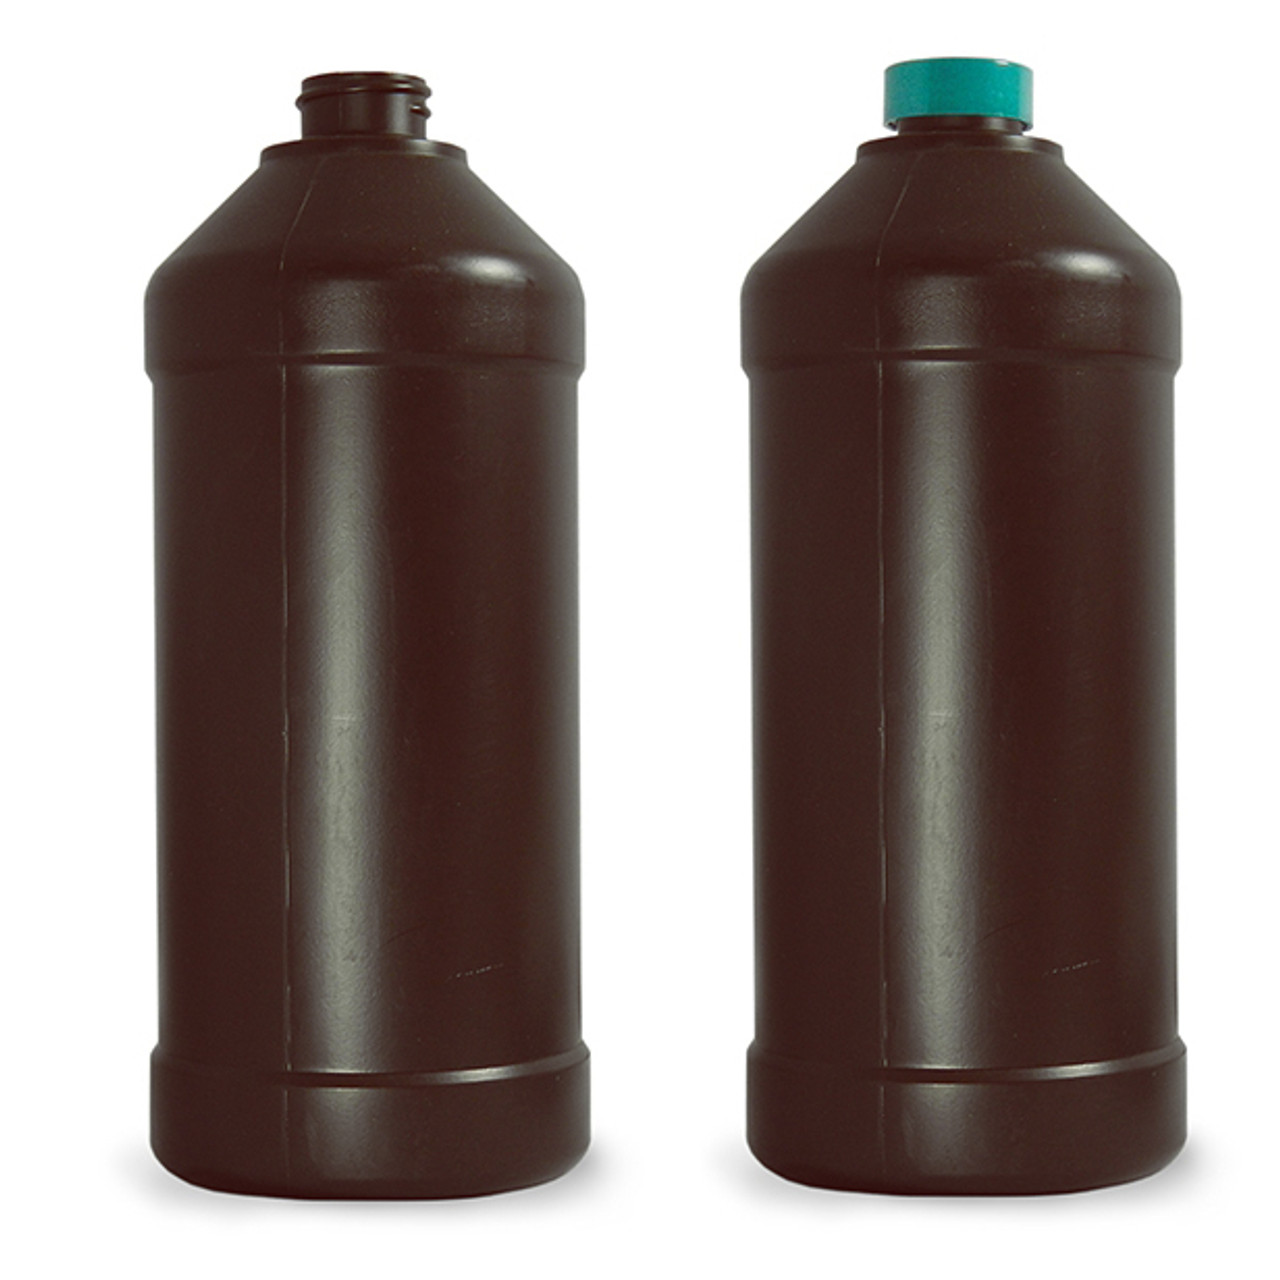 32 oz. Black PET Cylindrical Bottle with 28/410 Neck (Cap Sold